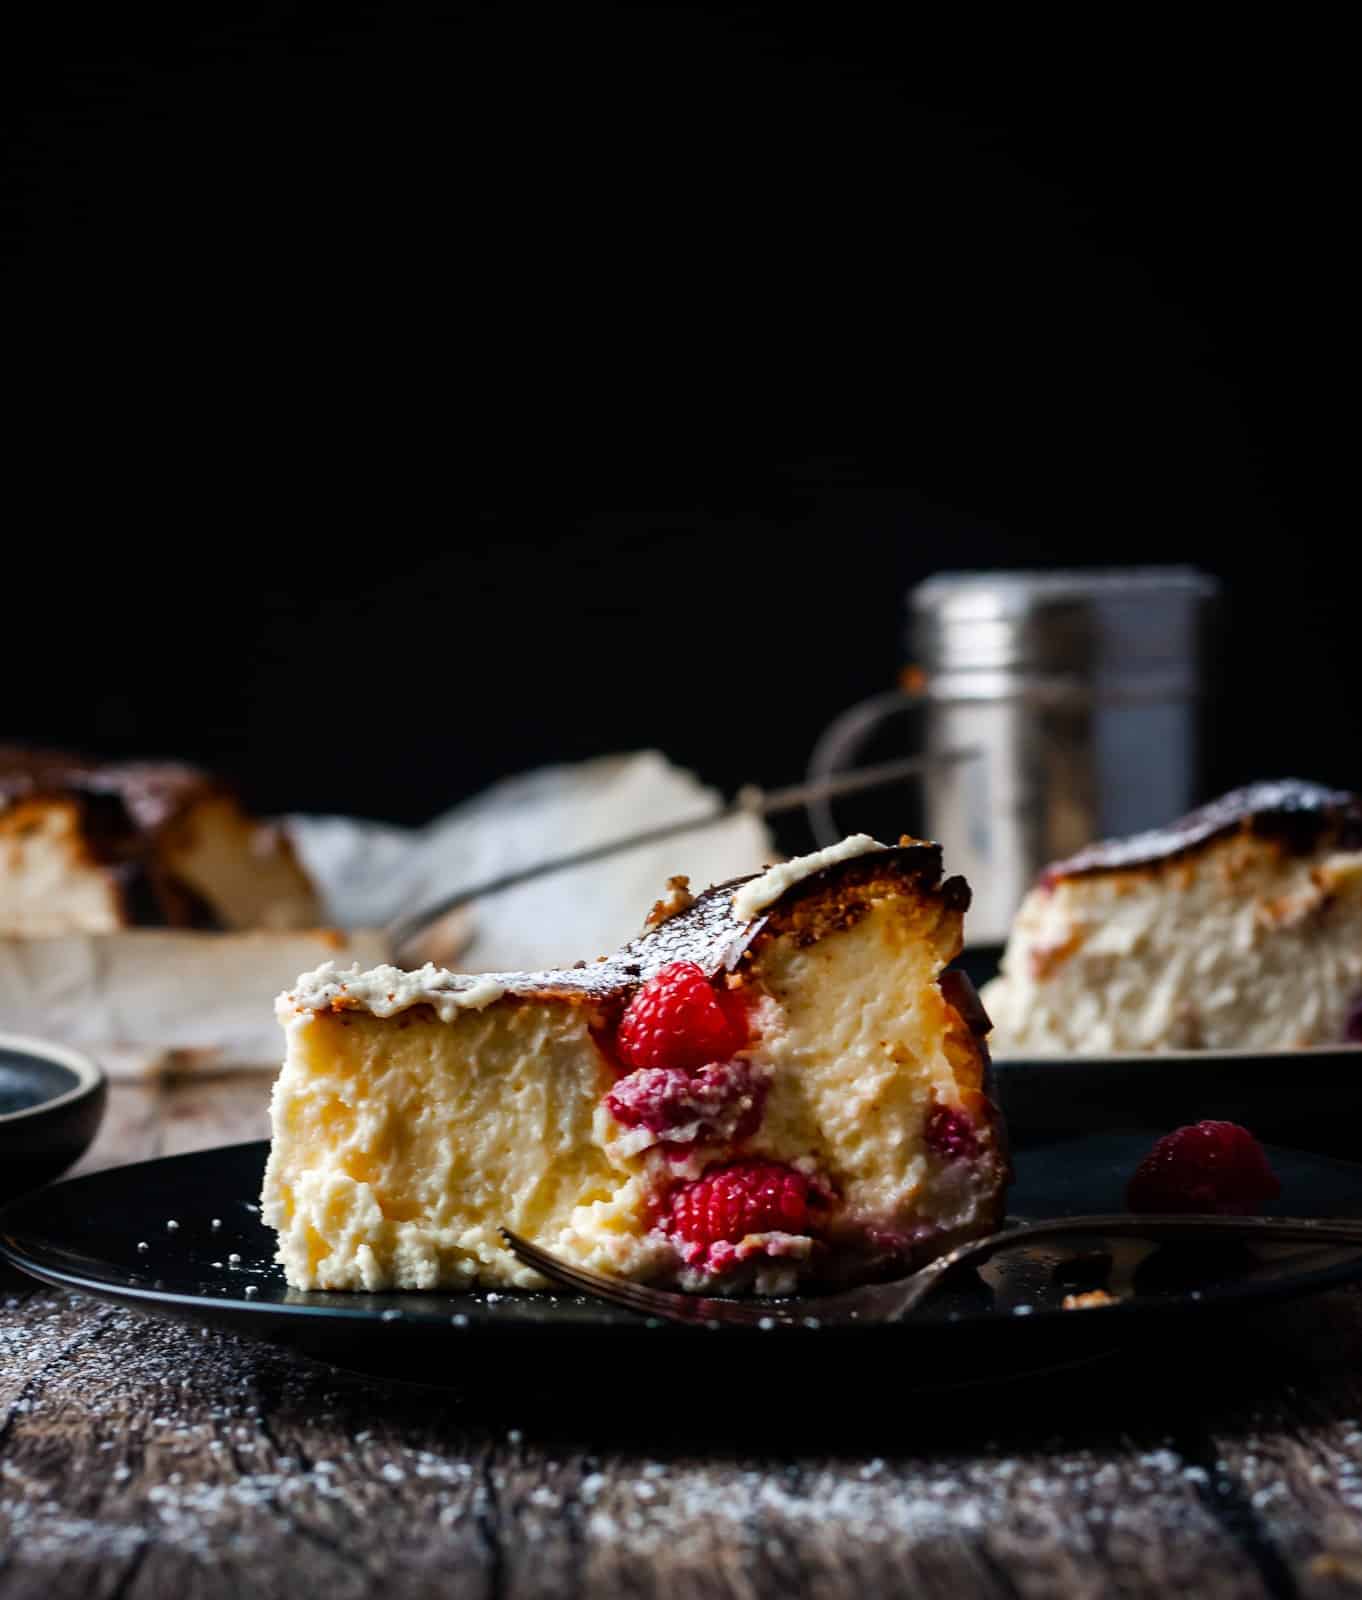 Rich and creamy on inside, my burnt Basque cheesecake with raspberries